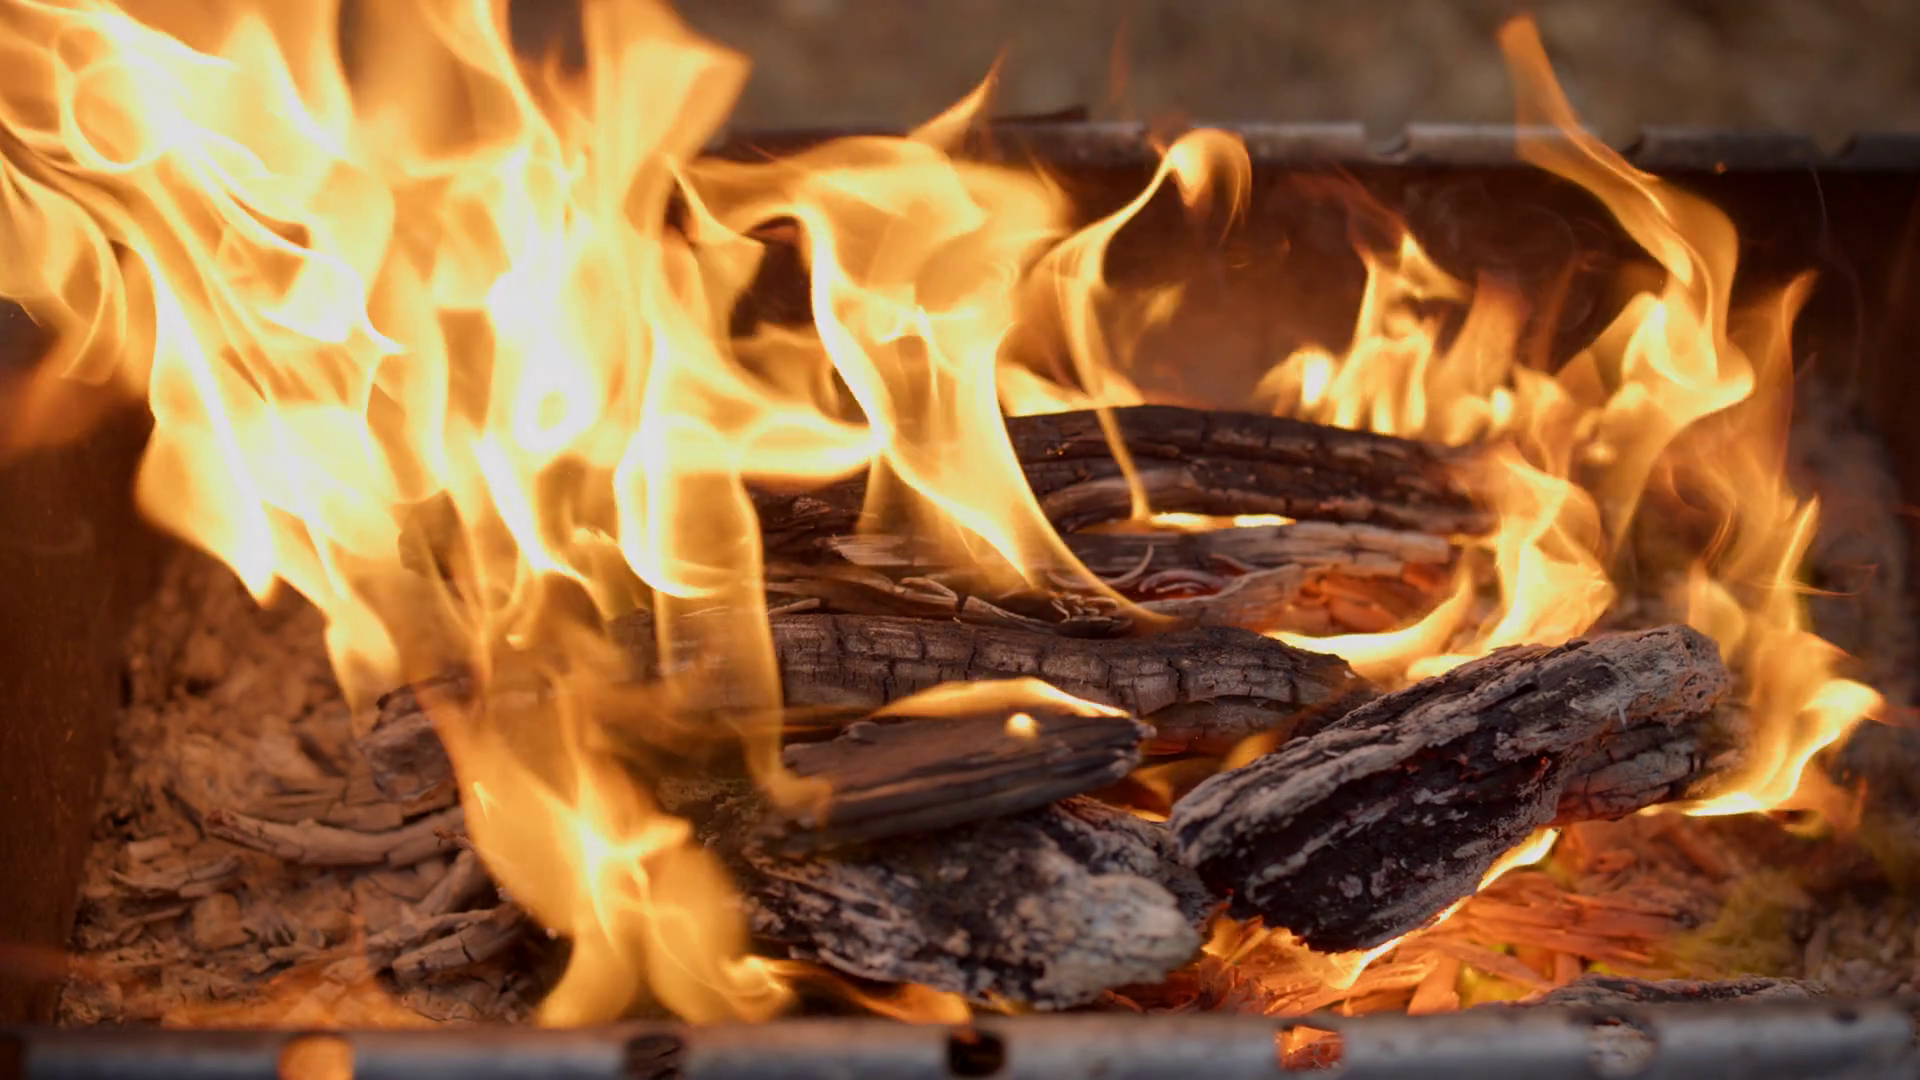 videoblocks-closeup-of-flames-of-fire-burning-wood-at-forest-fire-flames-blazing-over-pieces-of-timber-in-backyard-camping-bonfire-burning-in-slow-motion-at-forest_bygyhqnov_thumbnail-1080_01.png